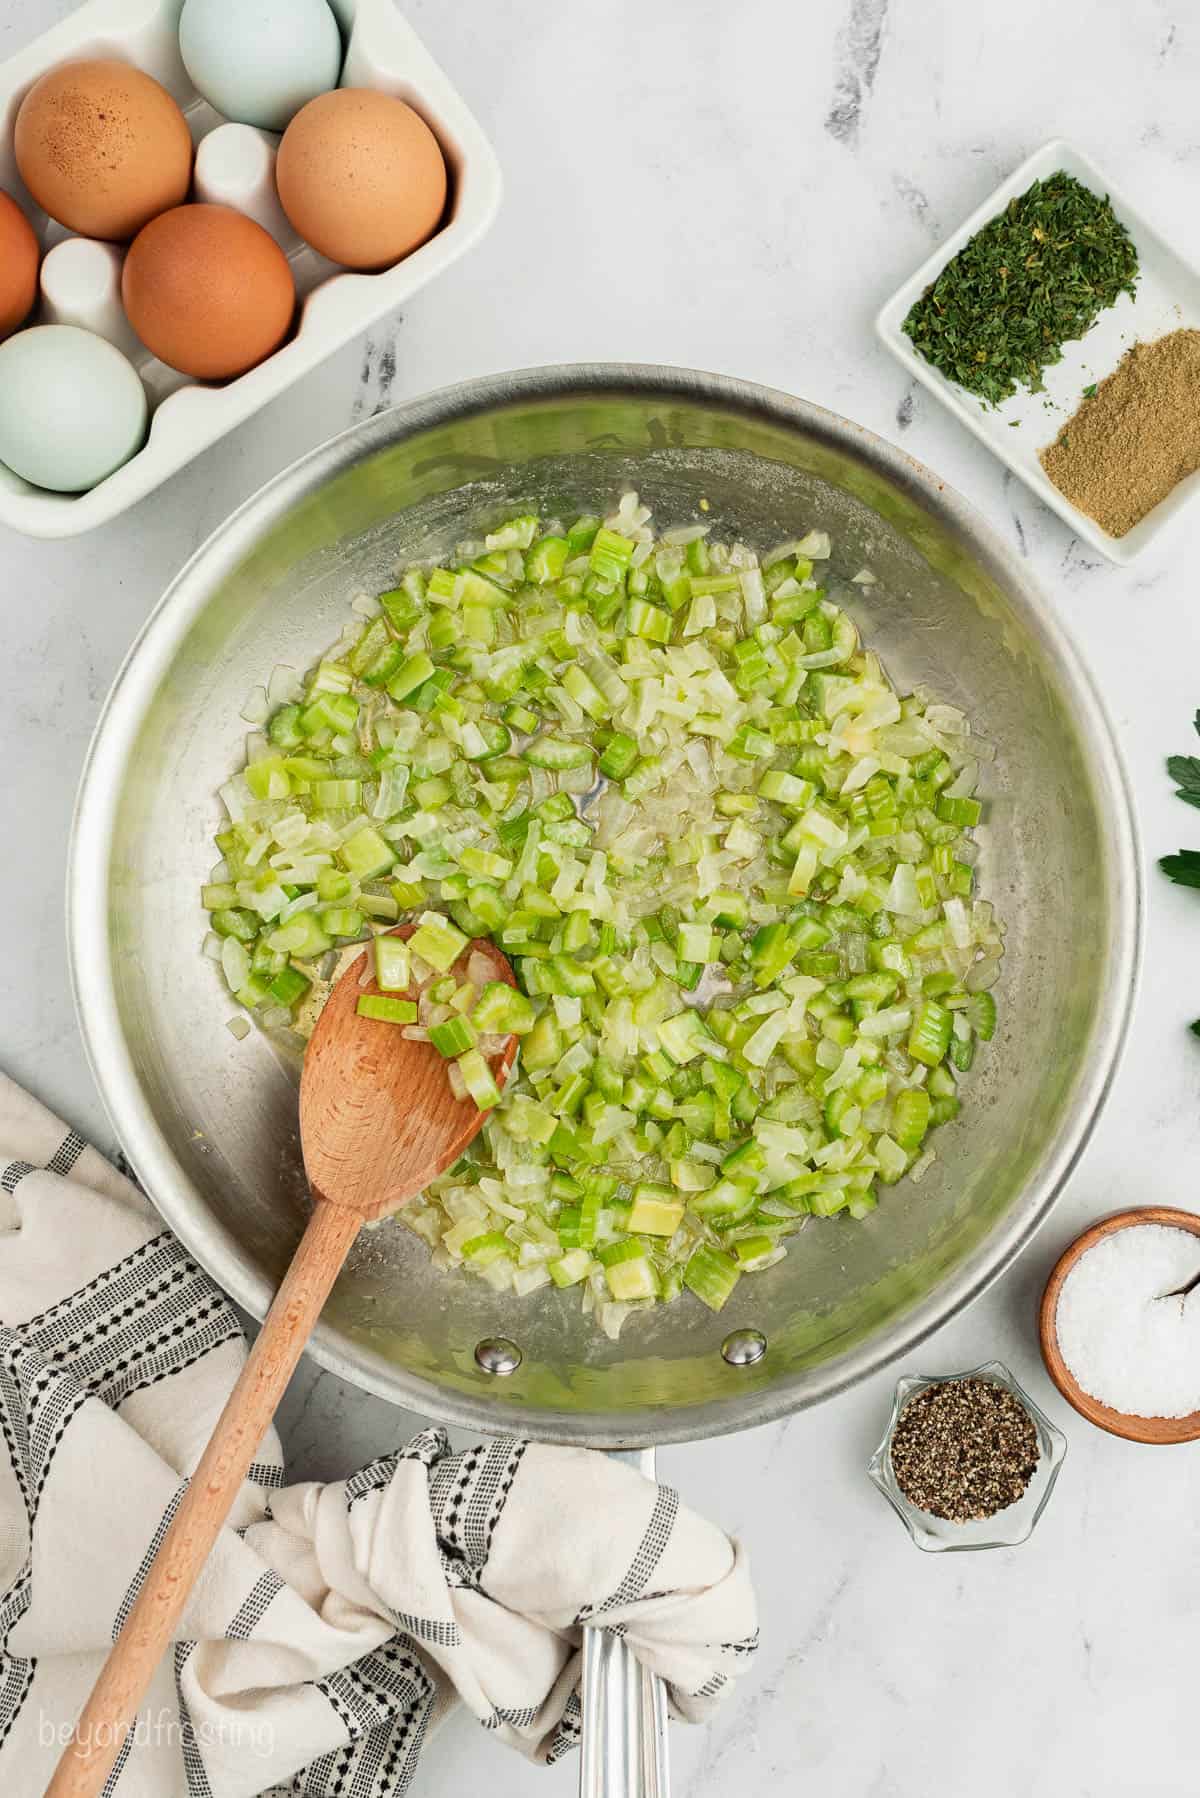 Chopped celery and onions being stirred with a wooden spoon on a countertop with eggs, spices and dried herbs